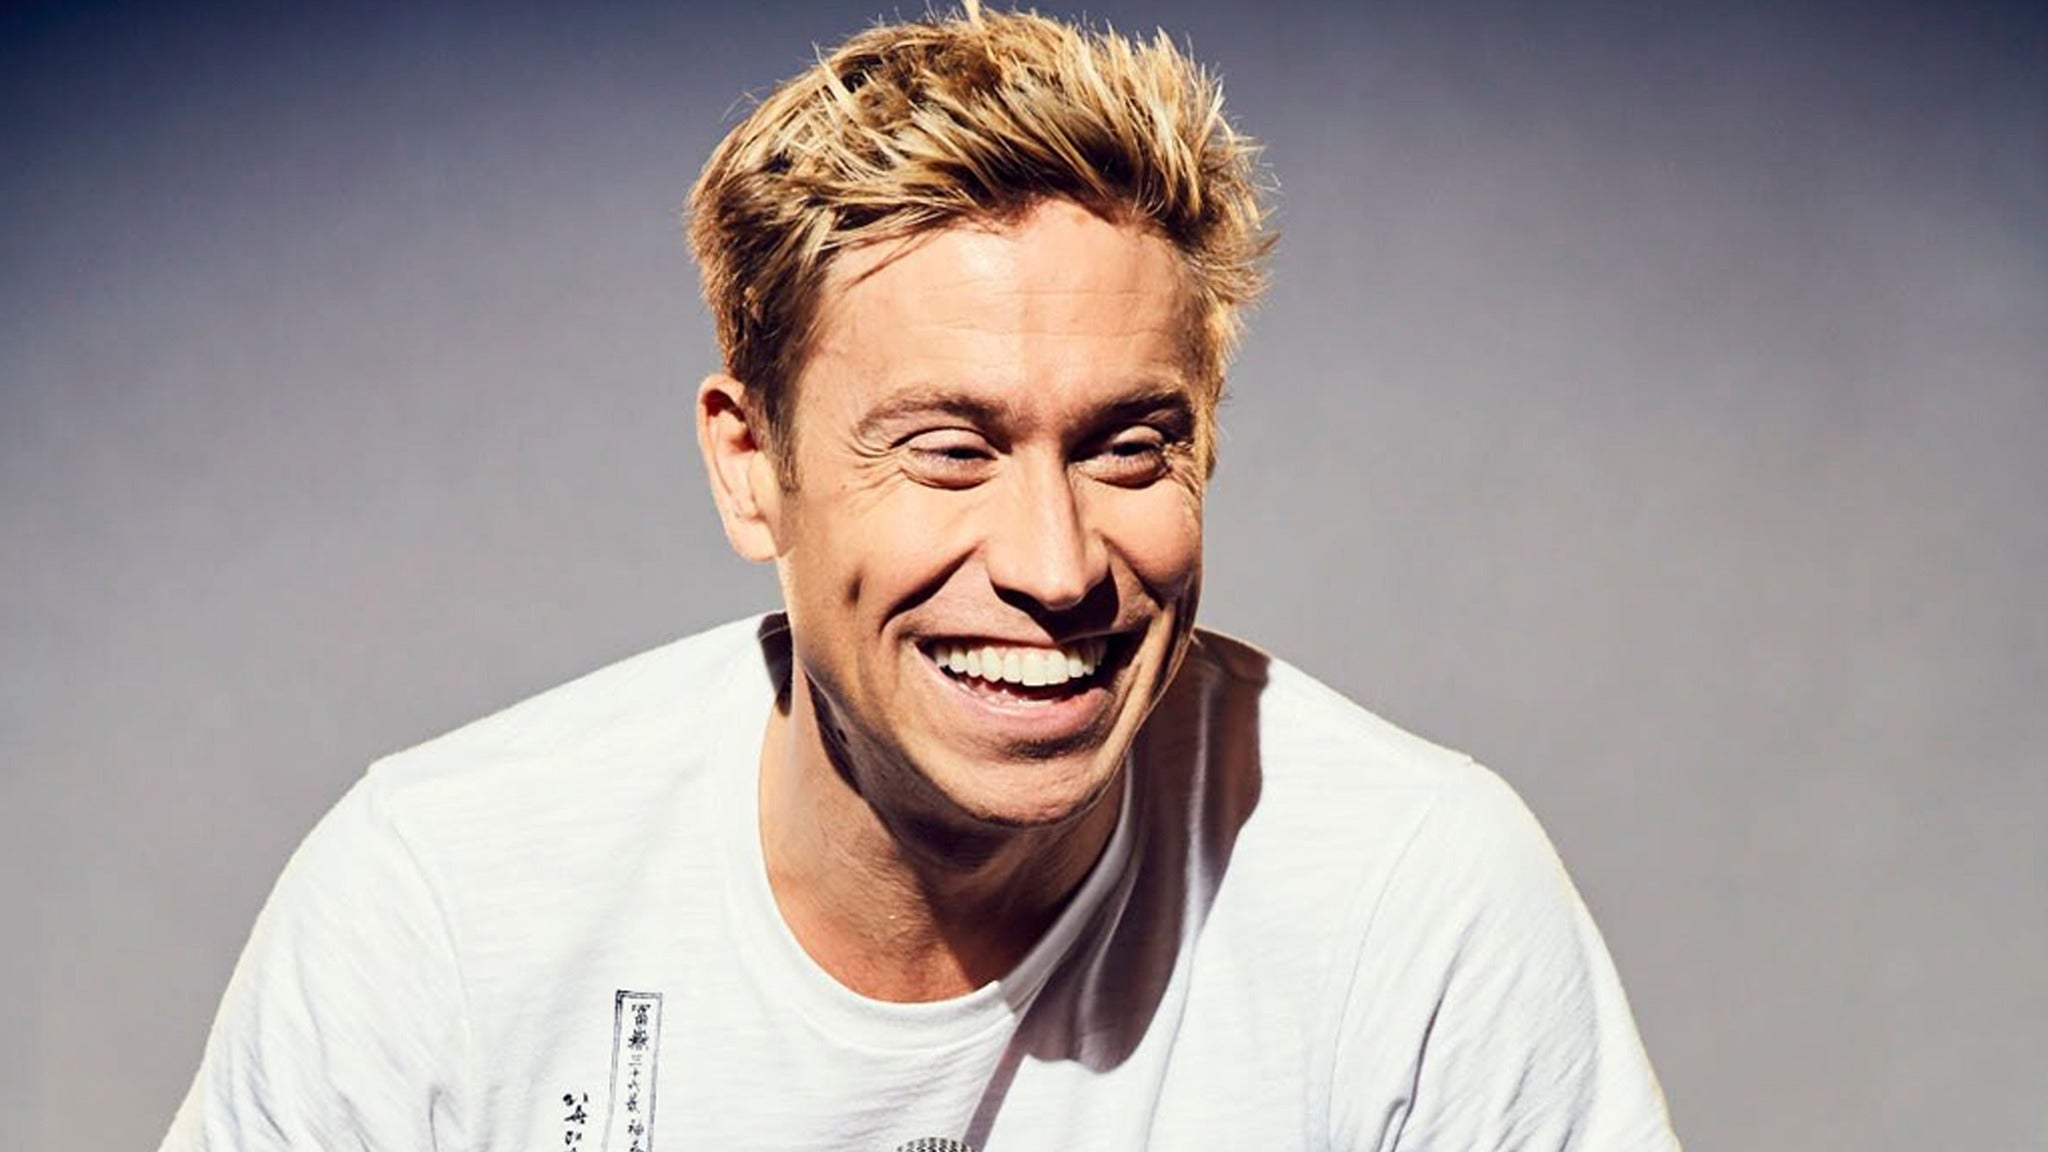 Russell Howard in Minneapolis promo photo for Citi® Cardmember Preferred presale offer code